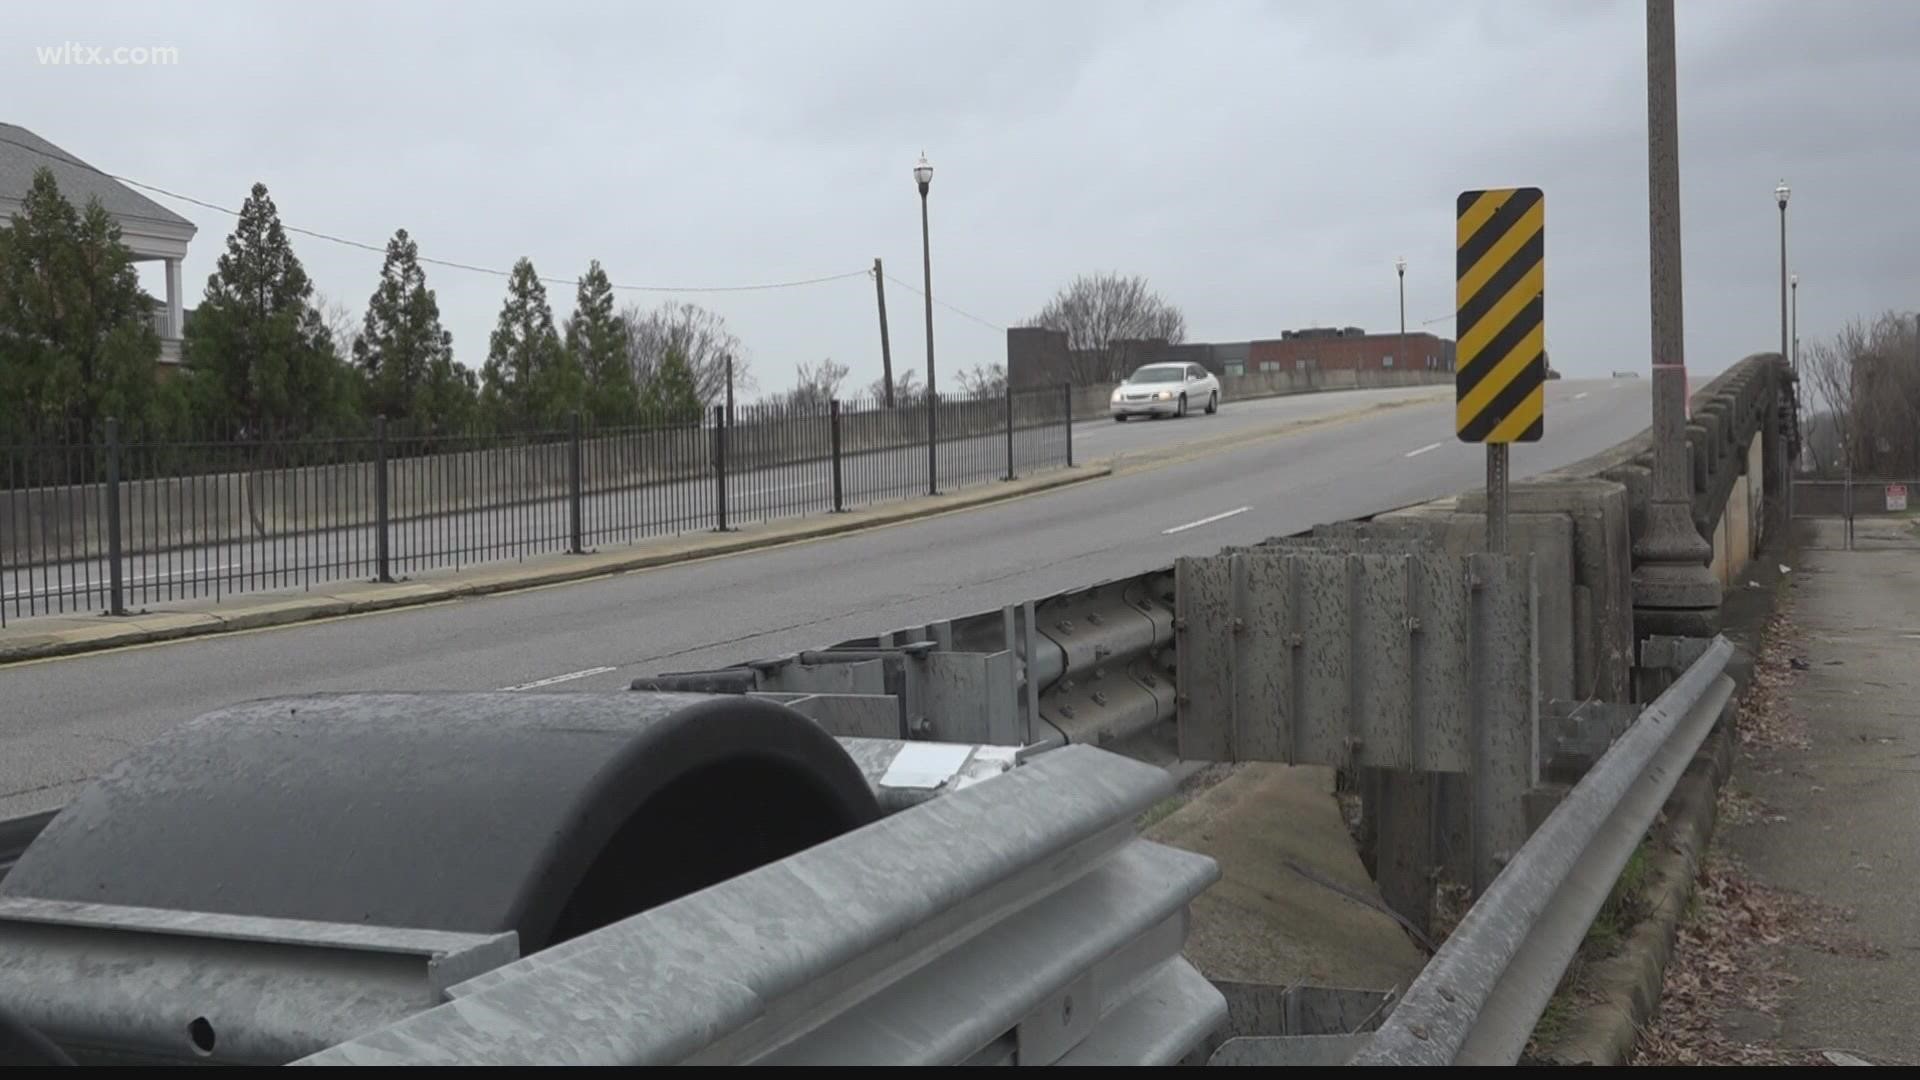 The bridge that goes over the railroad tracks is getting to be replaced soon and should cause a few detours.